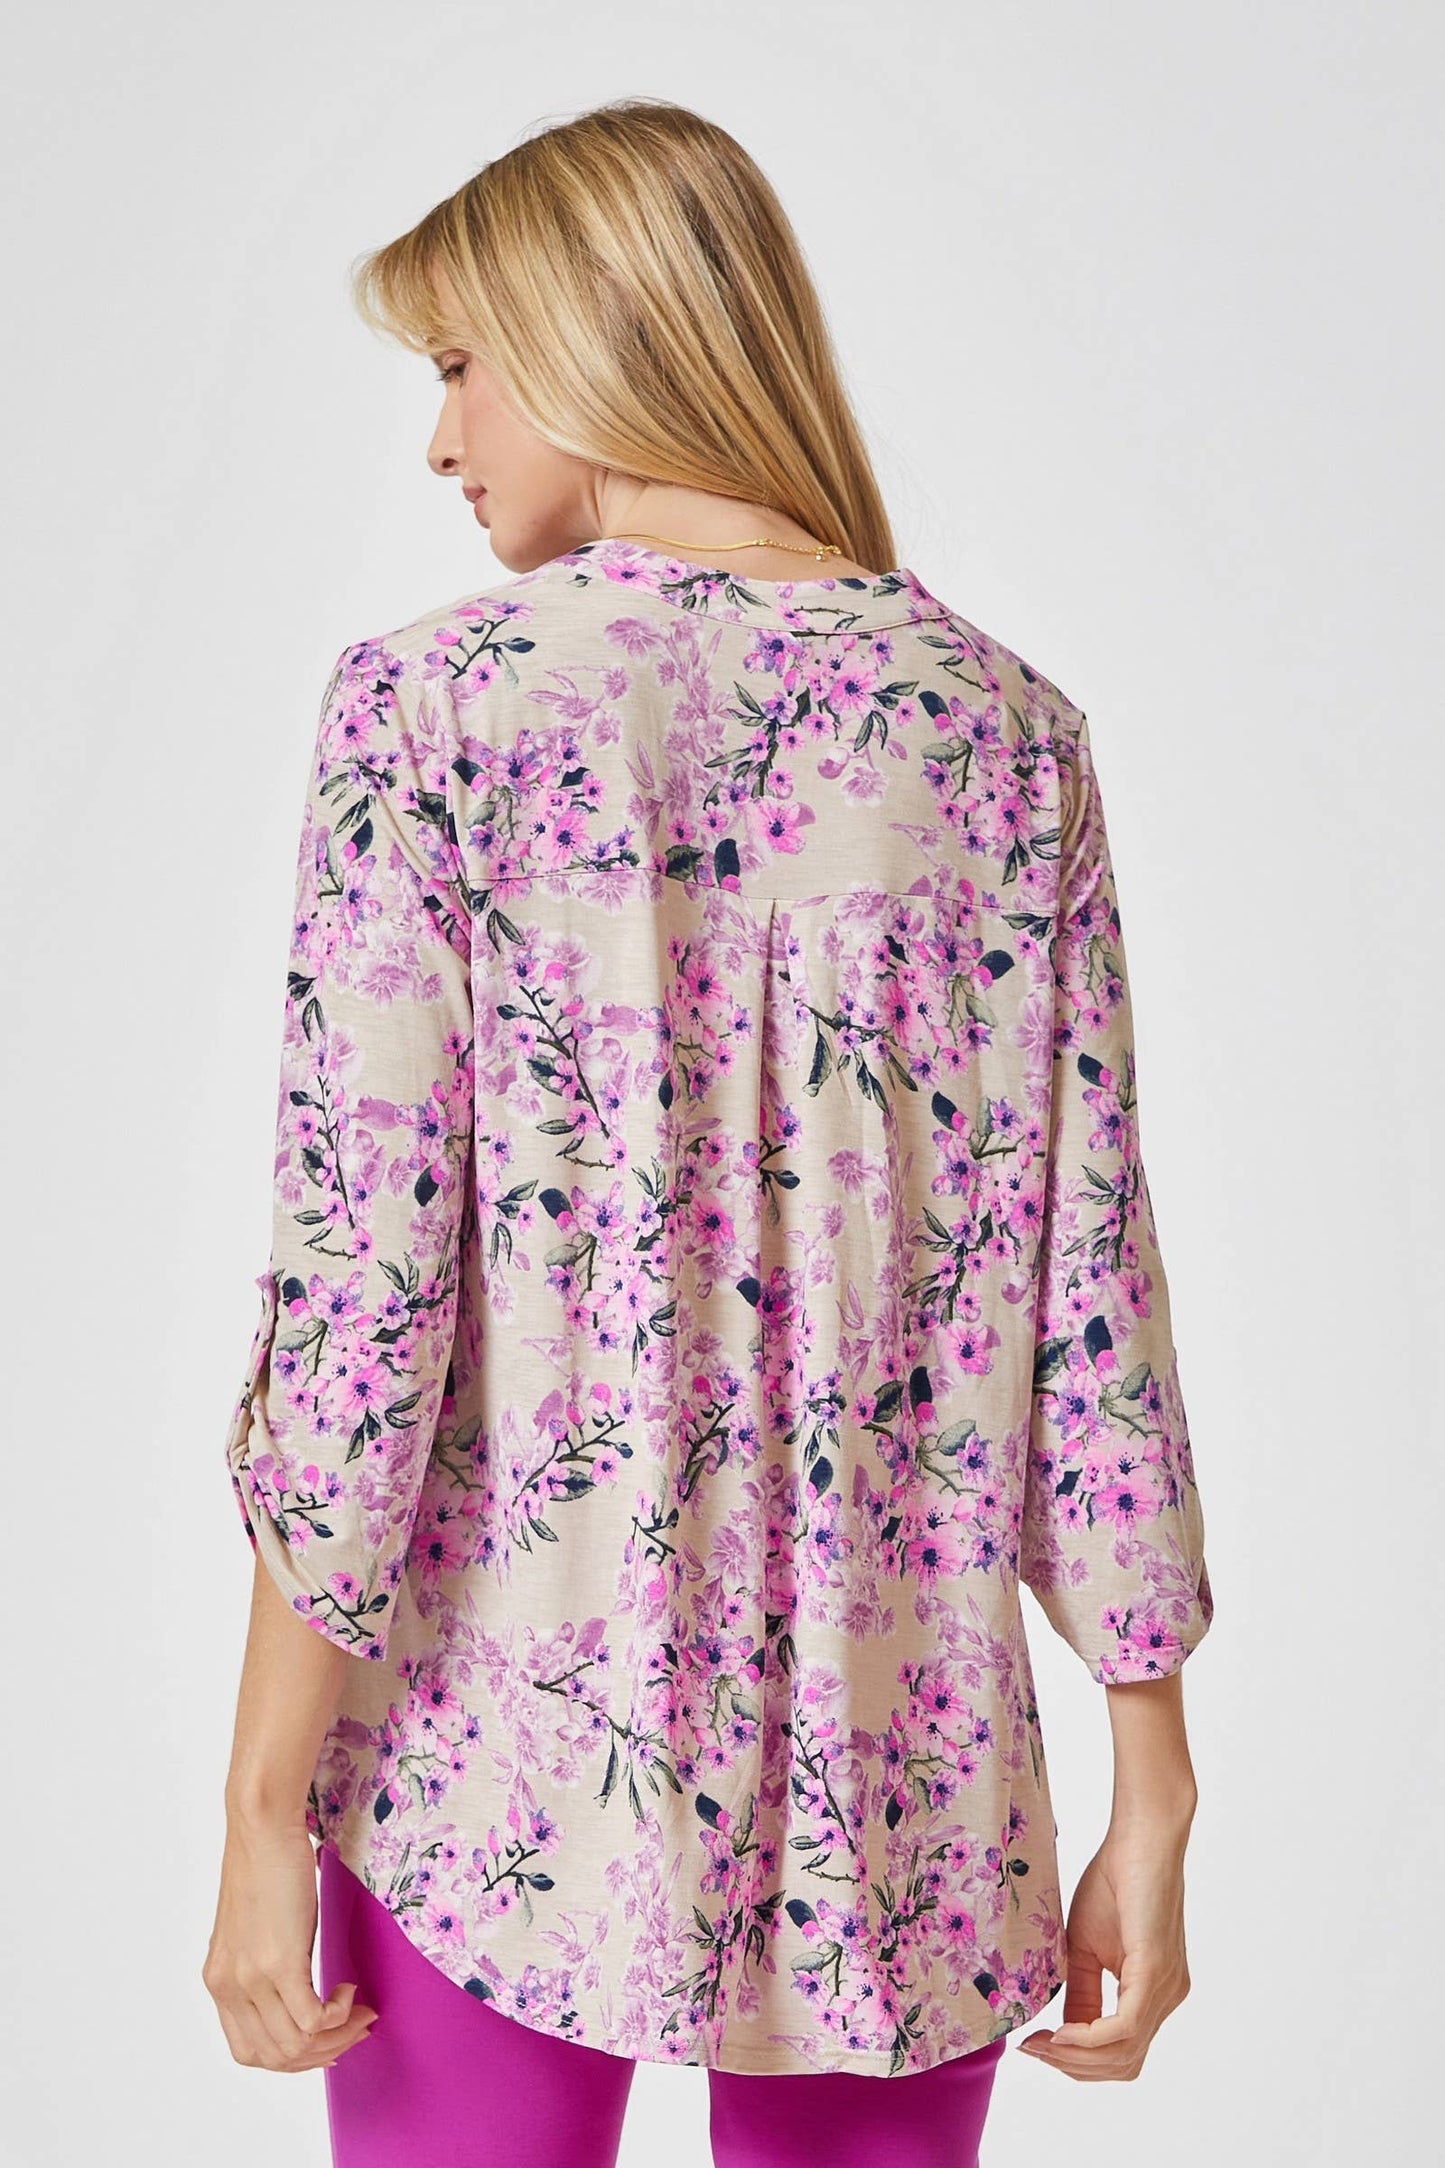 LIZZY Beige with Pink Cherry Blossom Print